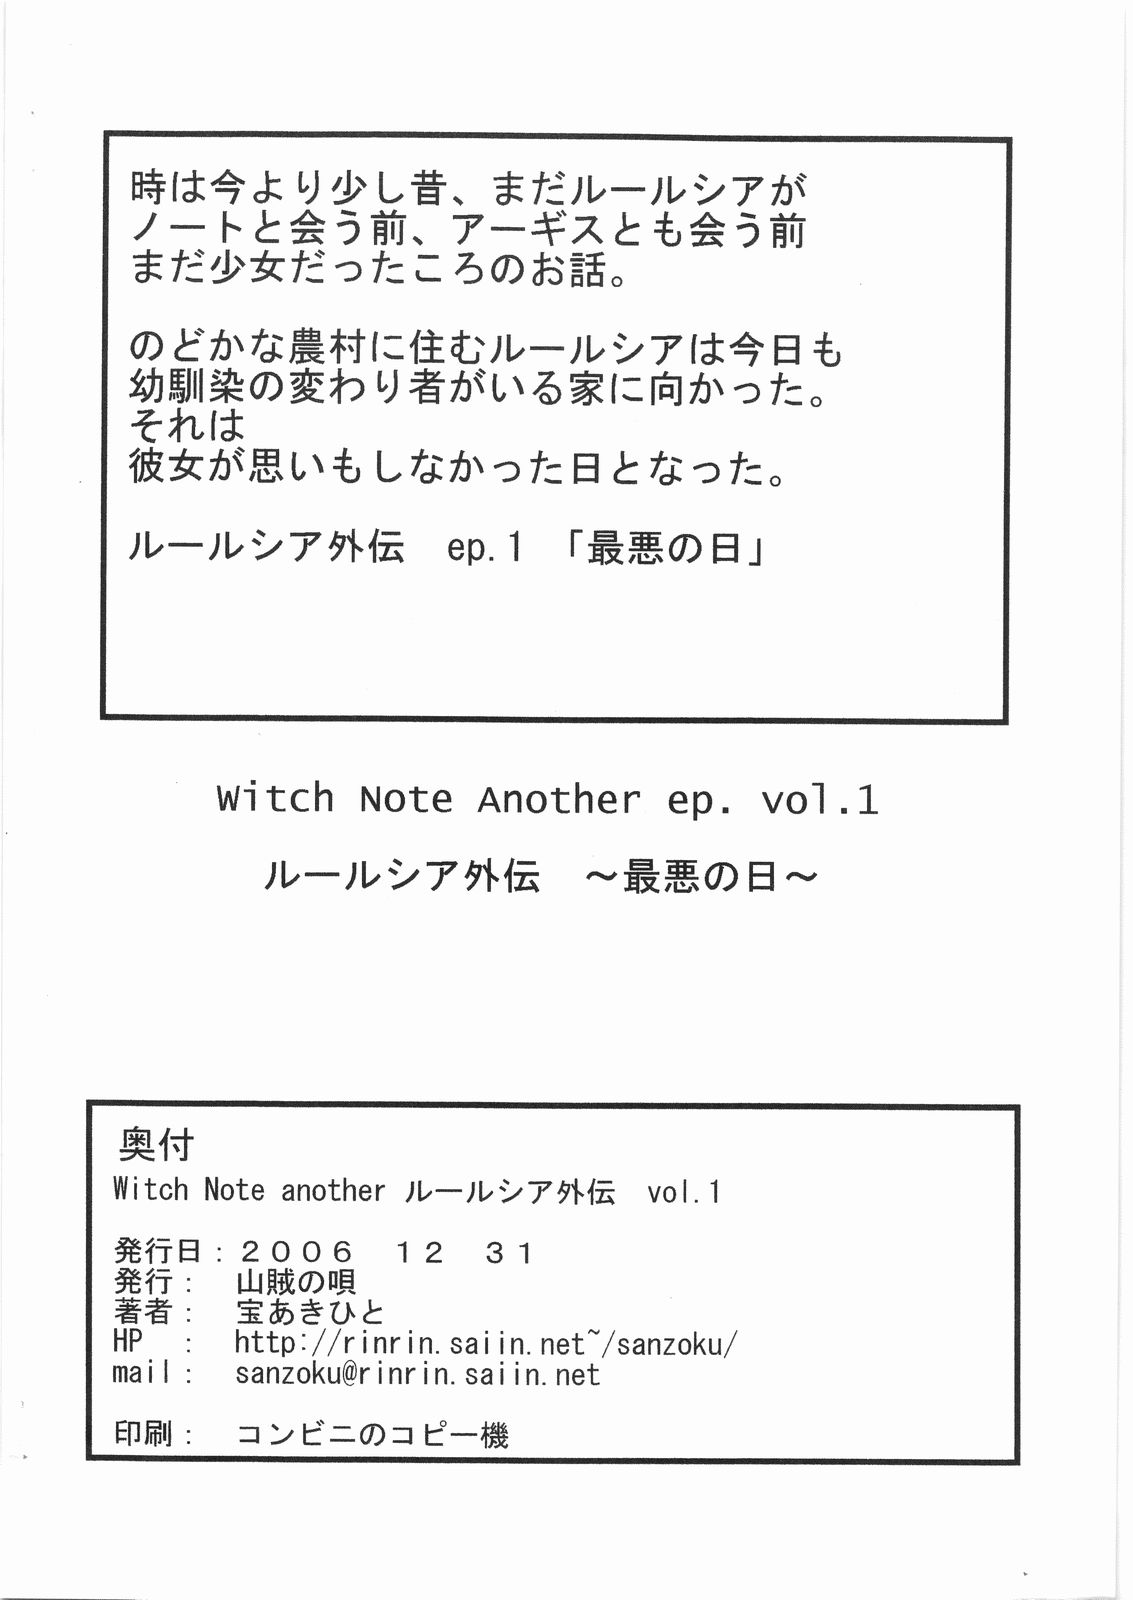 (C71) [山賊の唄 (宝あきひと)] Witch Note another vol.1 ルールシア外伝 ～最悪の日～